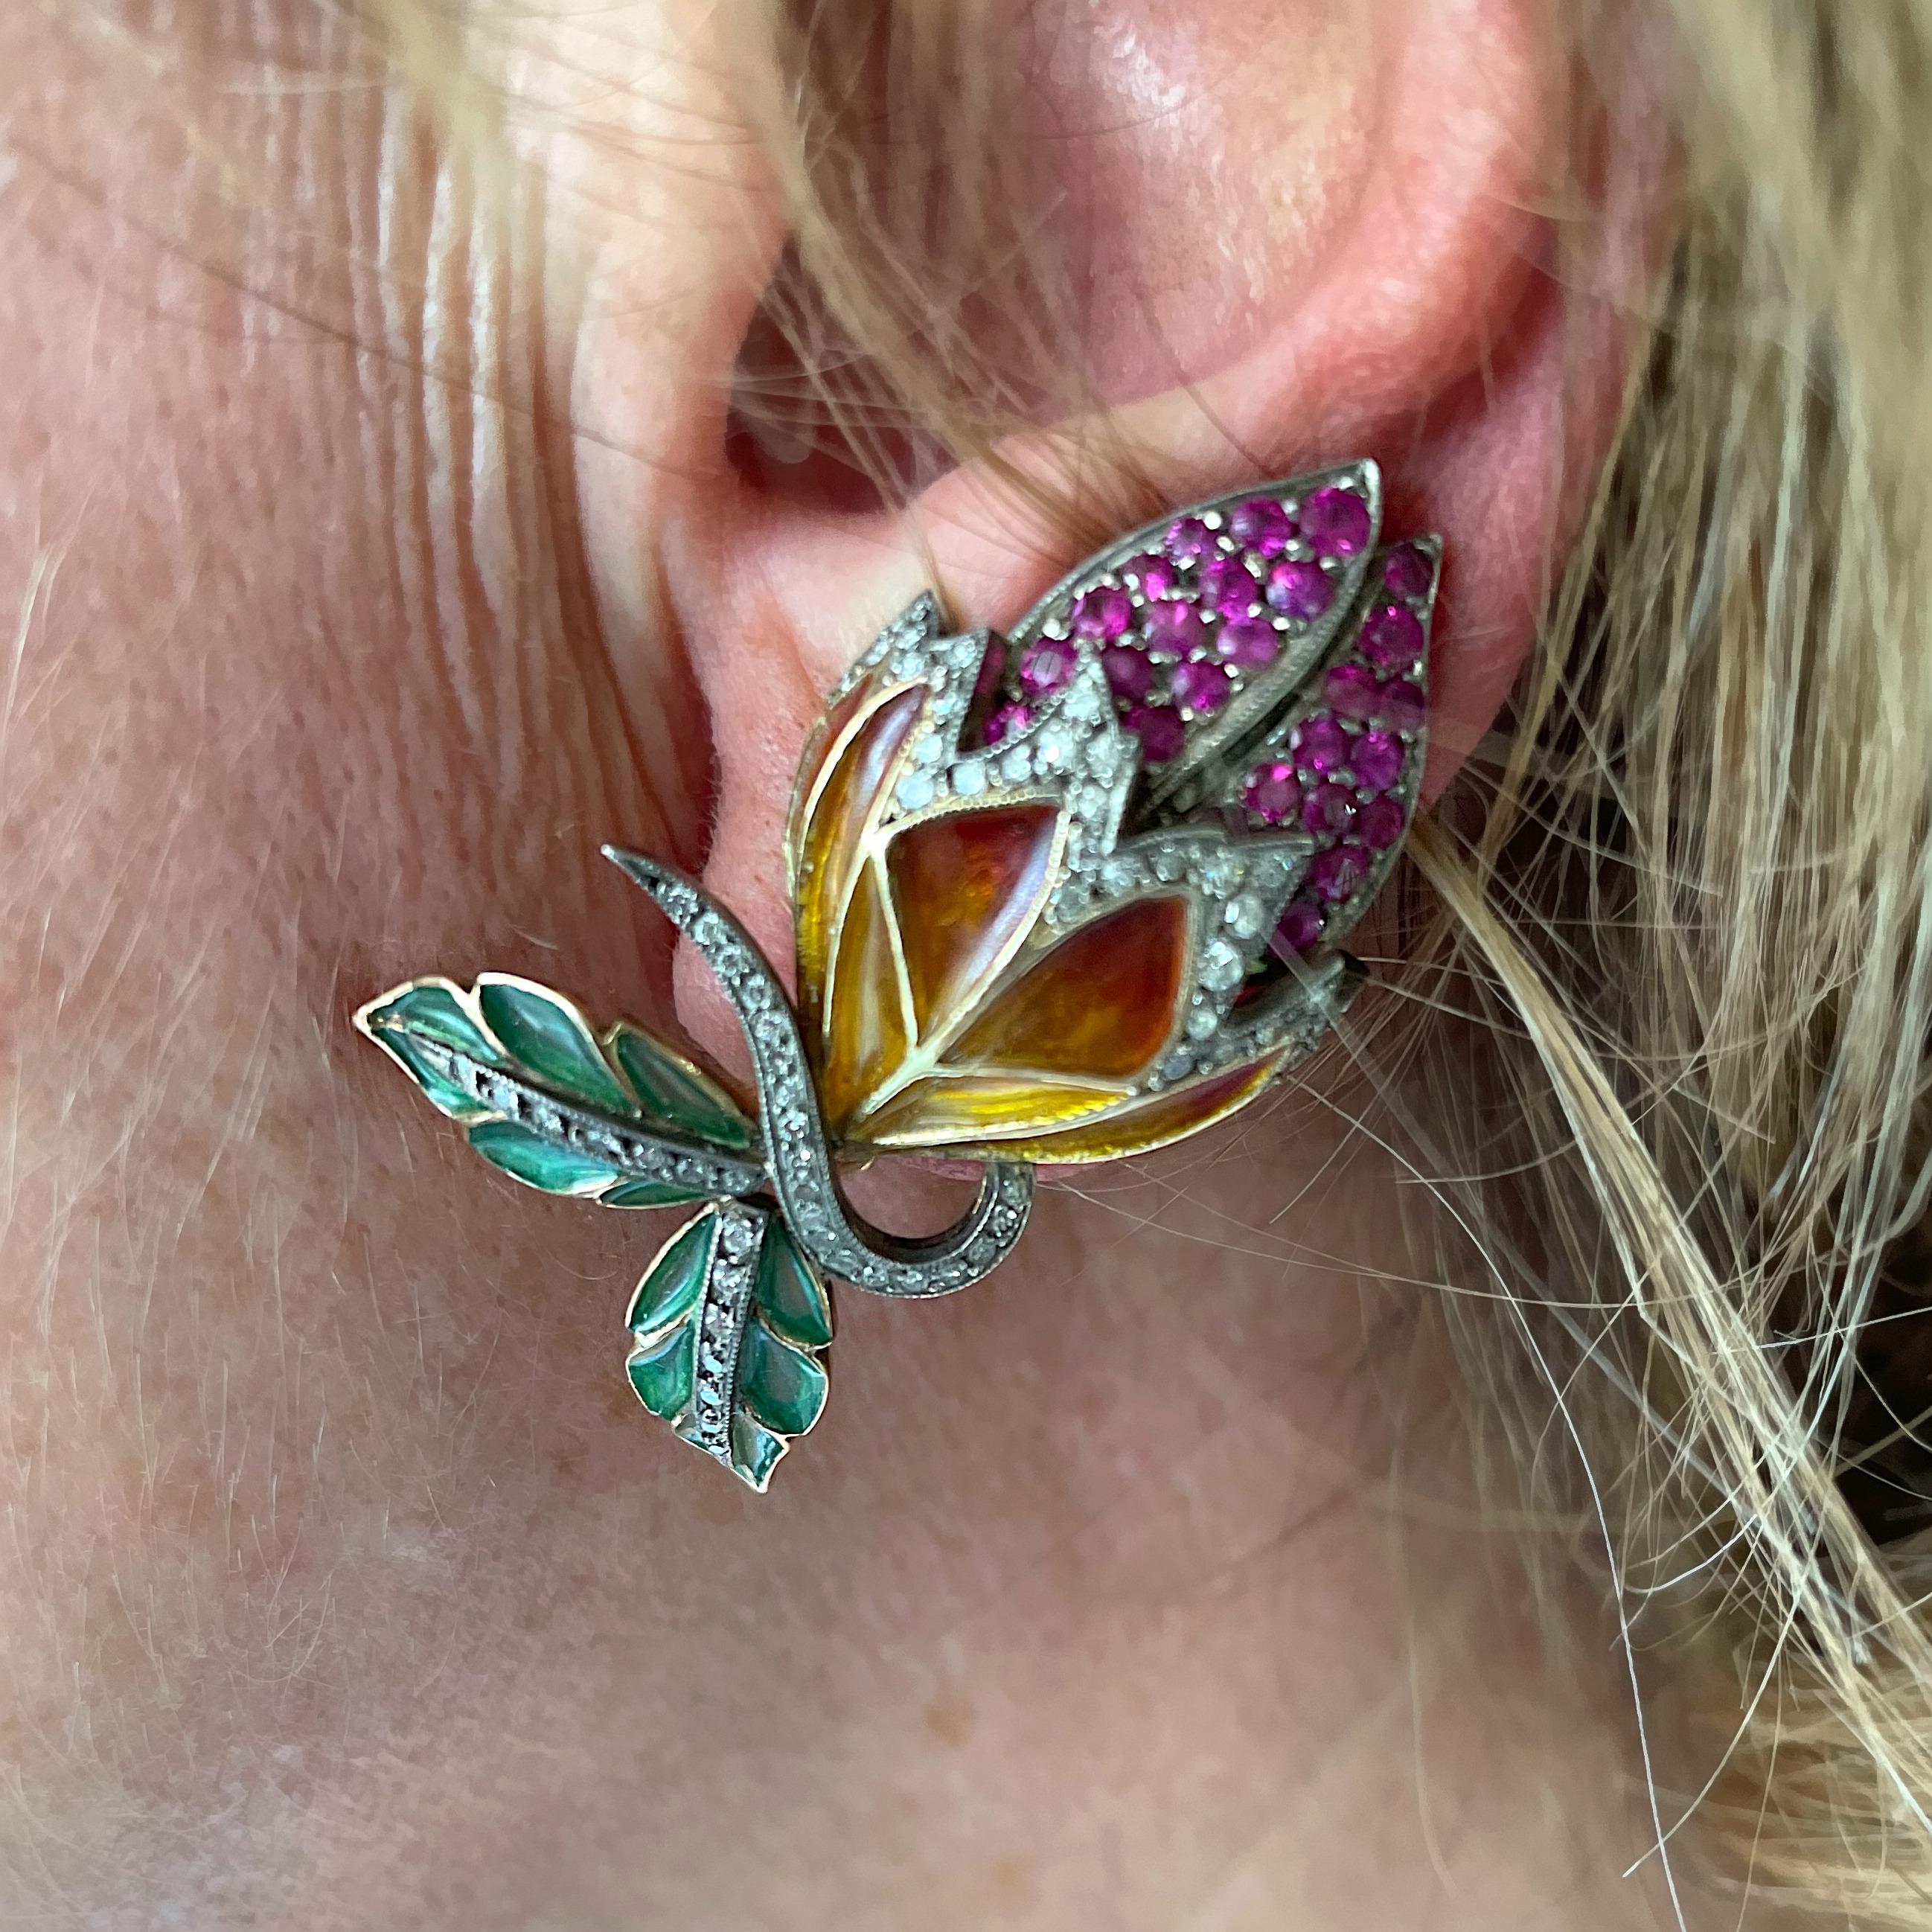 A pair of Moira bud earrings, with orange and yellow plique à jour enamel sepals and green leaves, with pavé set rubies and diamonds, mounted in gold, with silver settings. Numbered.

Moira’s eponymous collection was inspired by clients searching